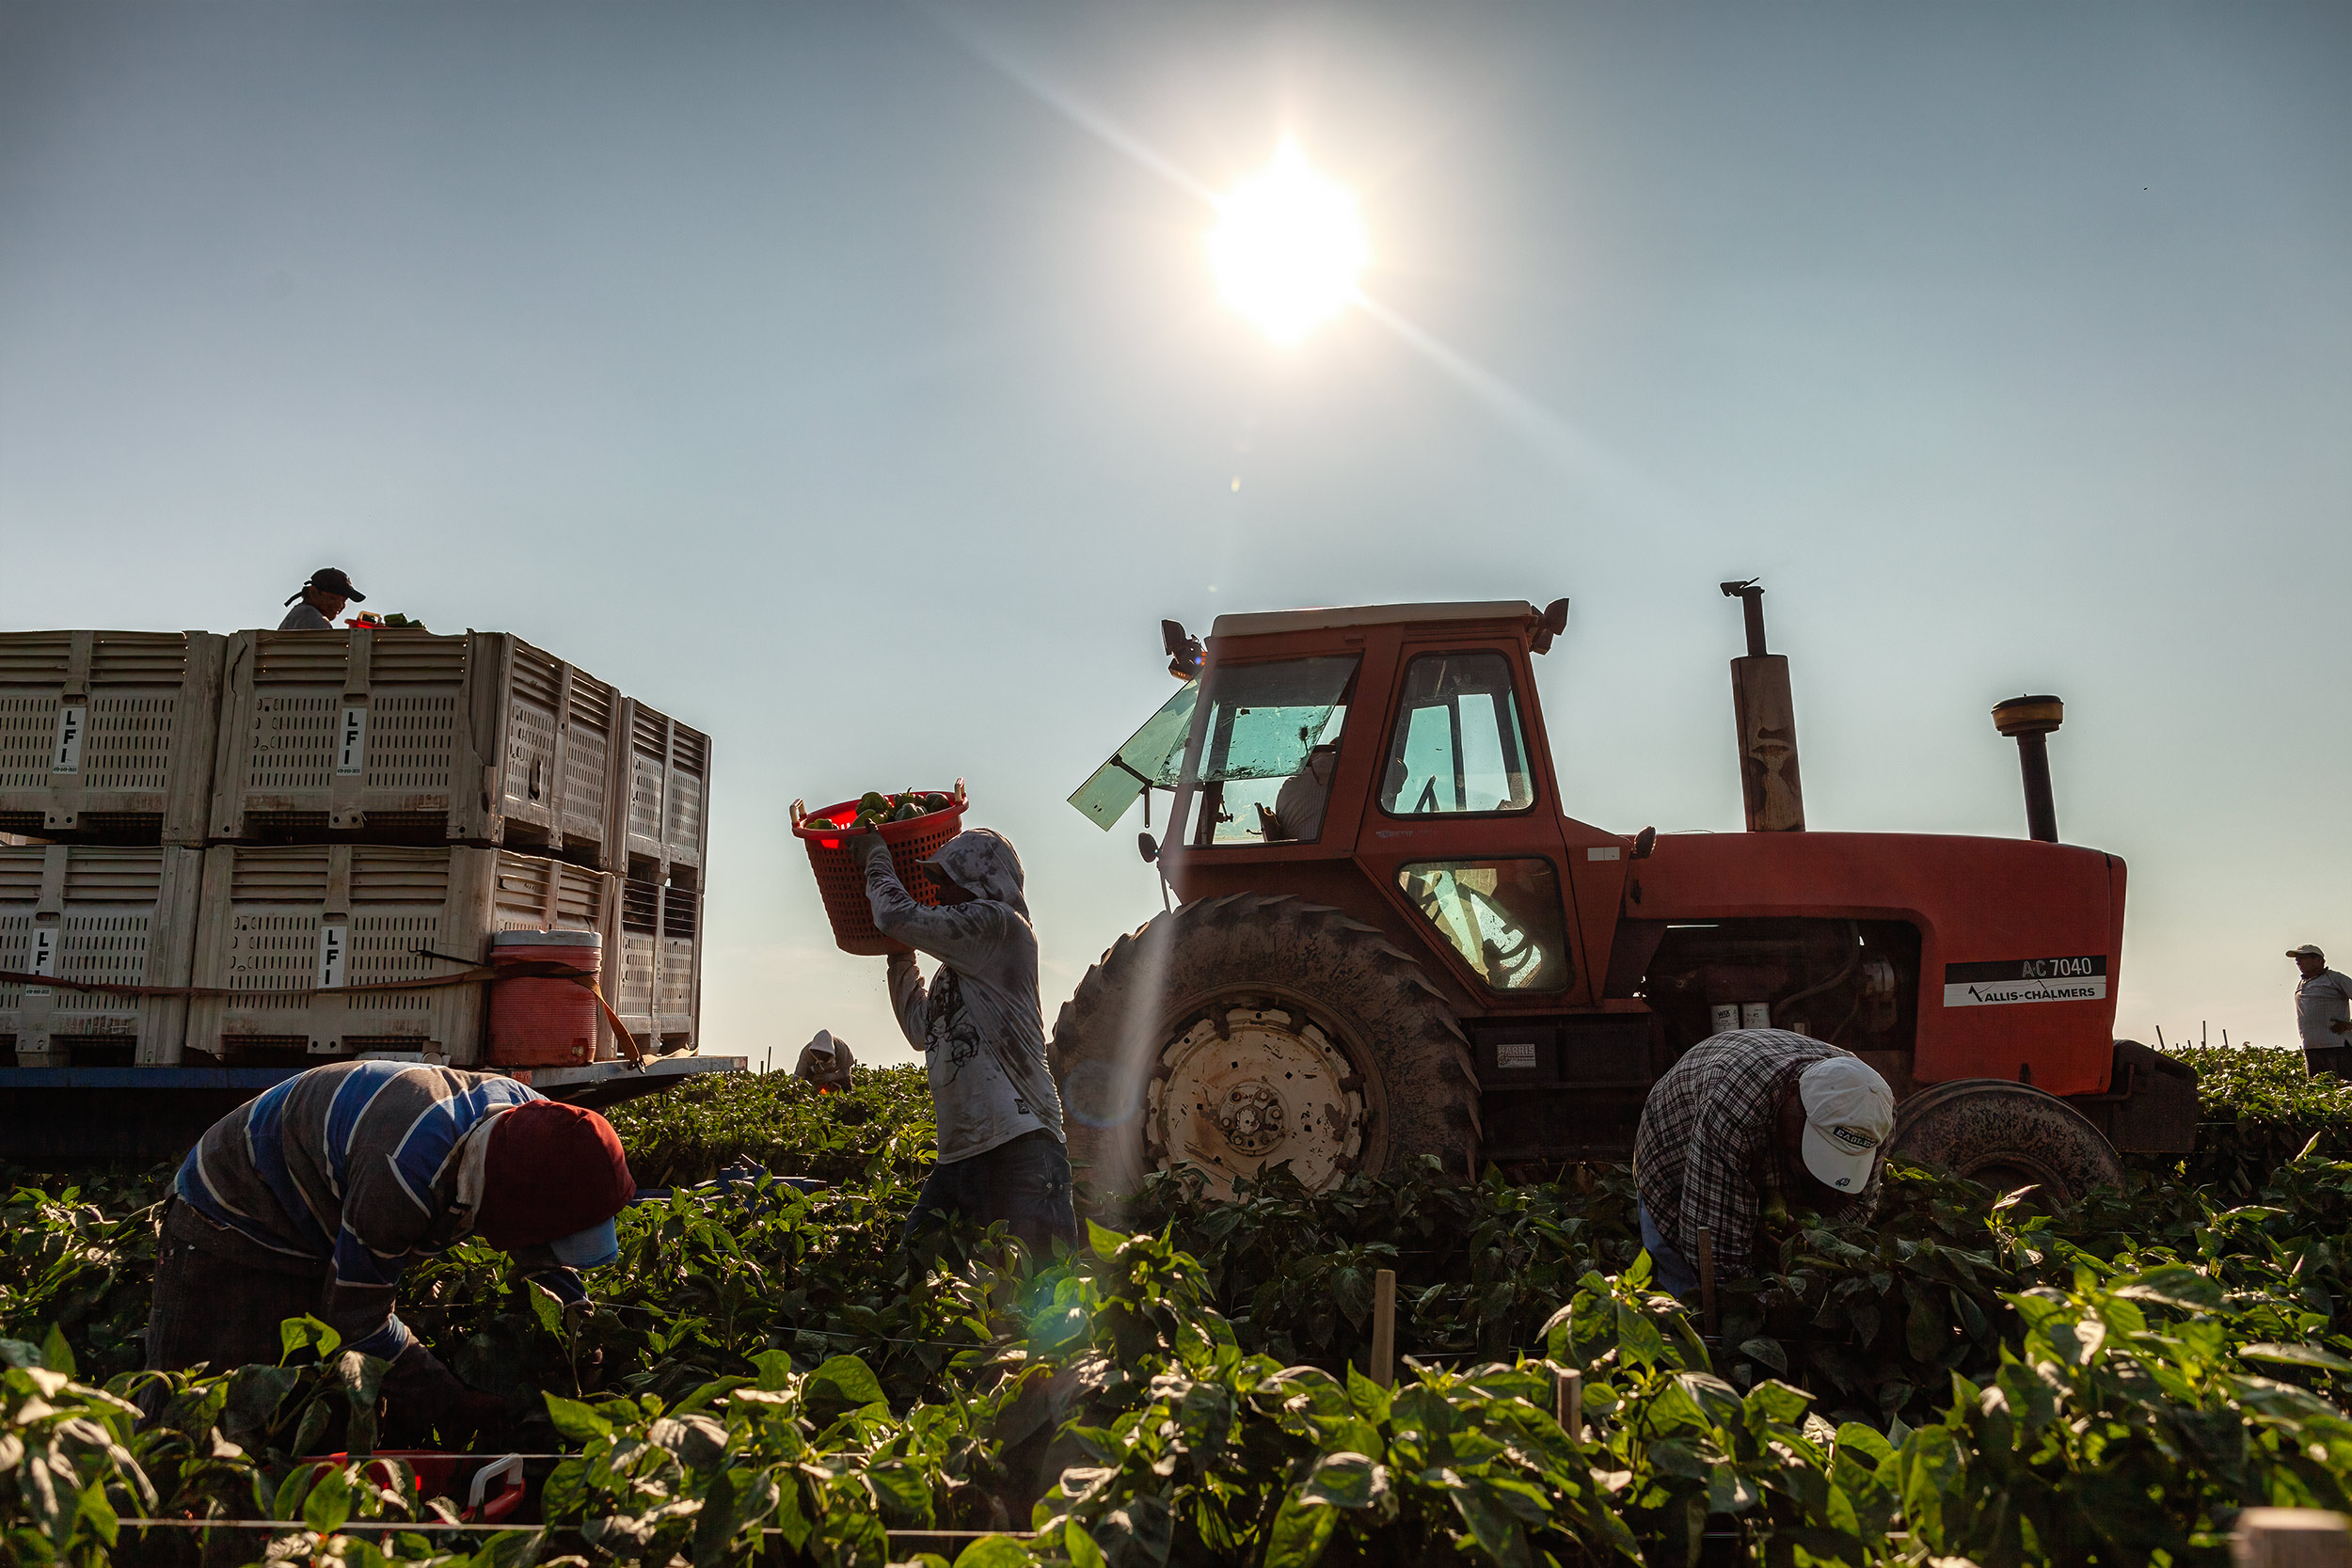 Tractor hauling crop pickers harvest of chili peppers in a field on a sunny day. agriculture photography.